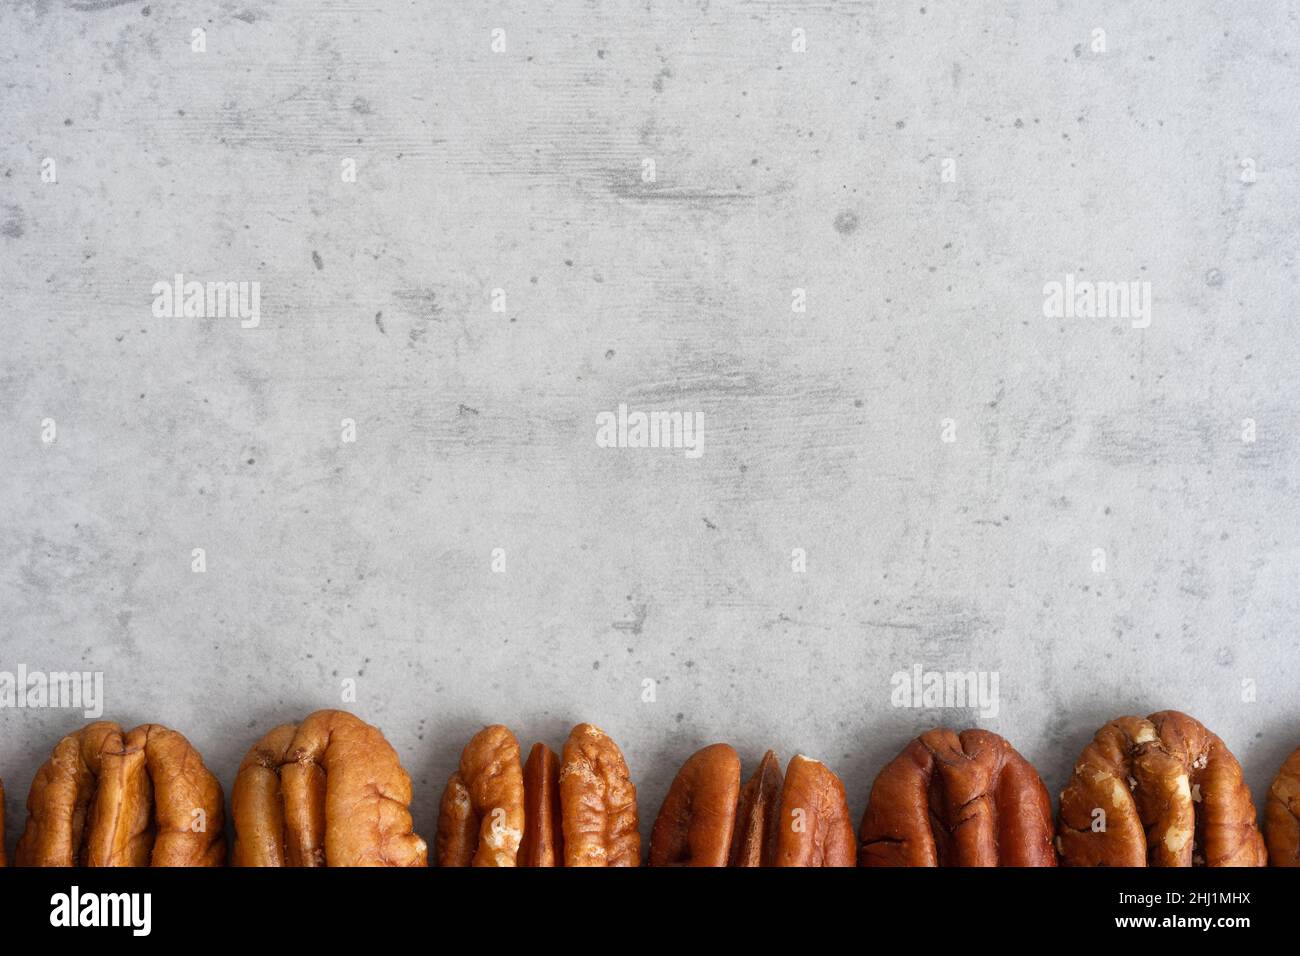 Row of pecans below on a gray background, close-up Stock Photo